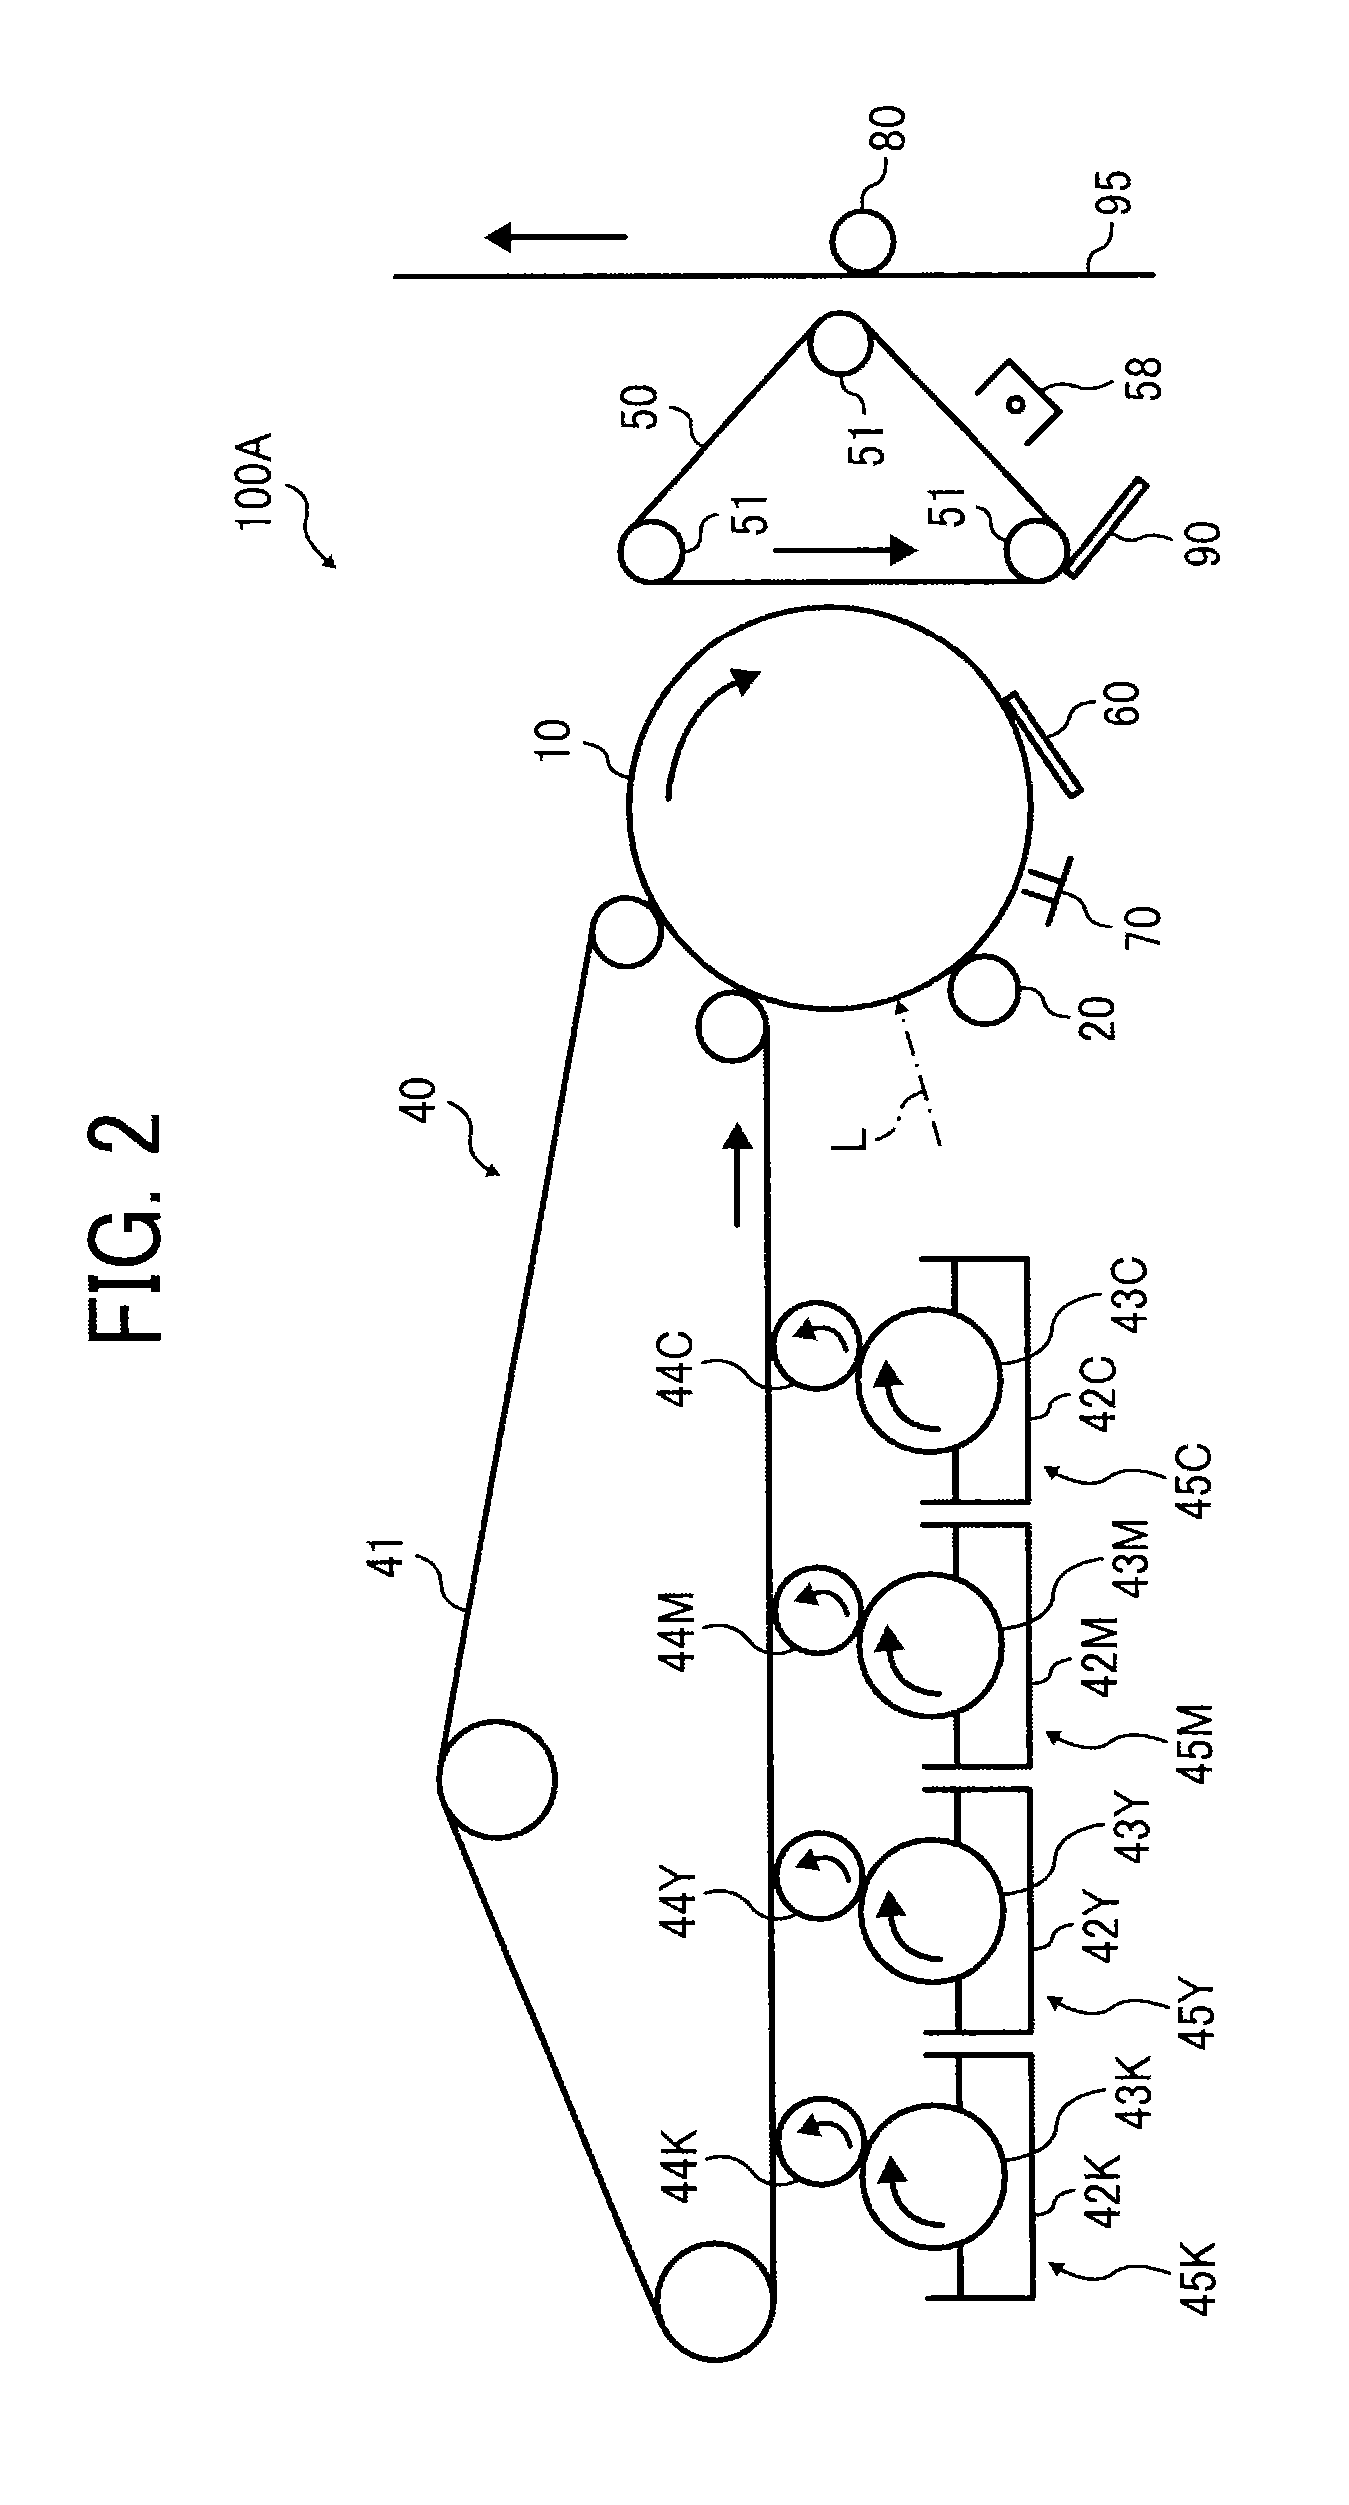 Toner, development agent, and image forming apparatus using the same